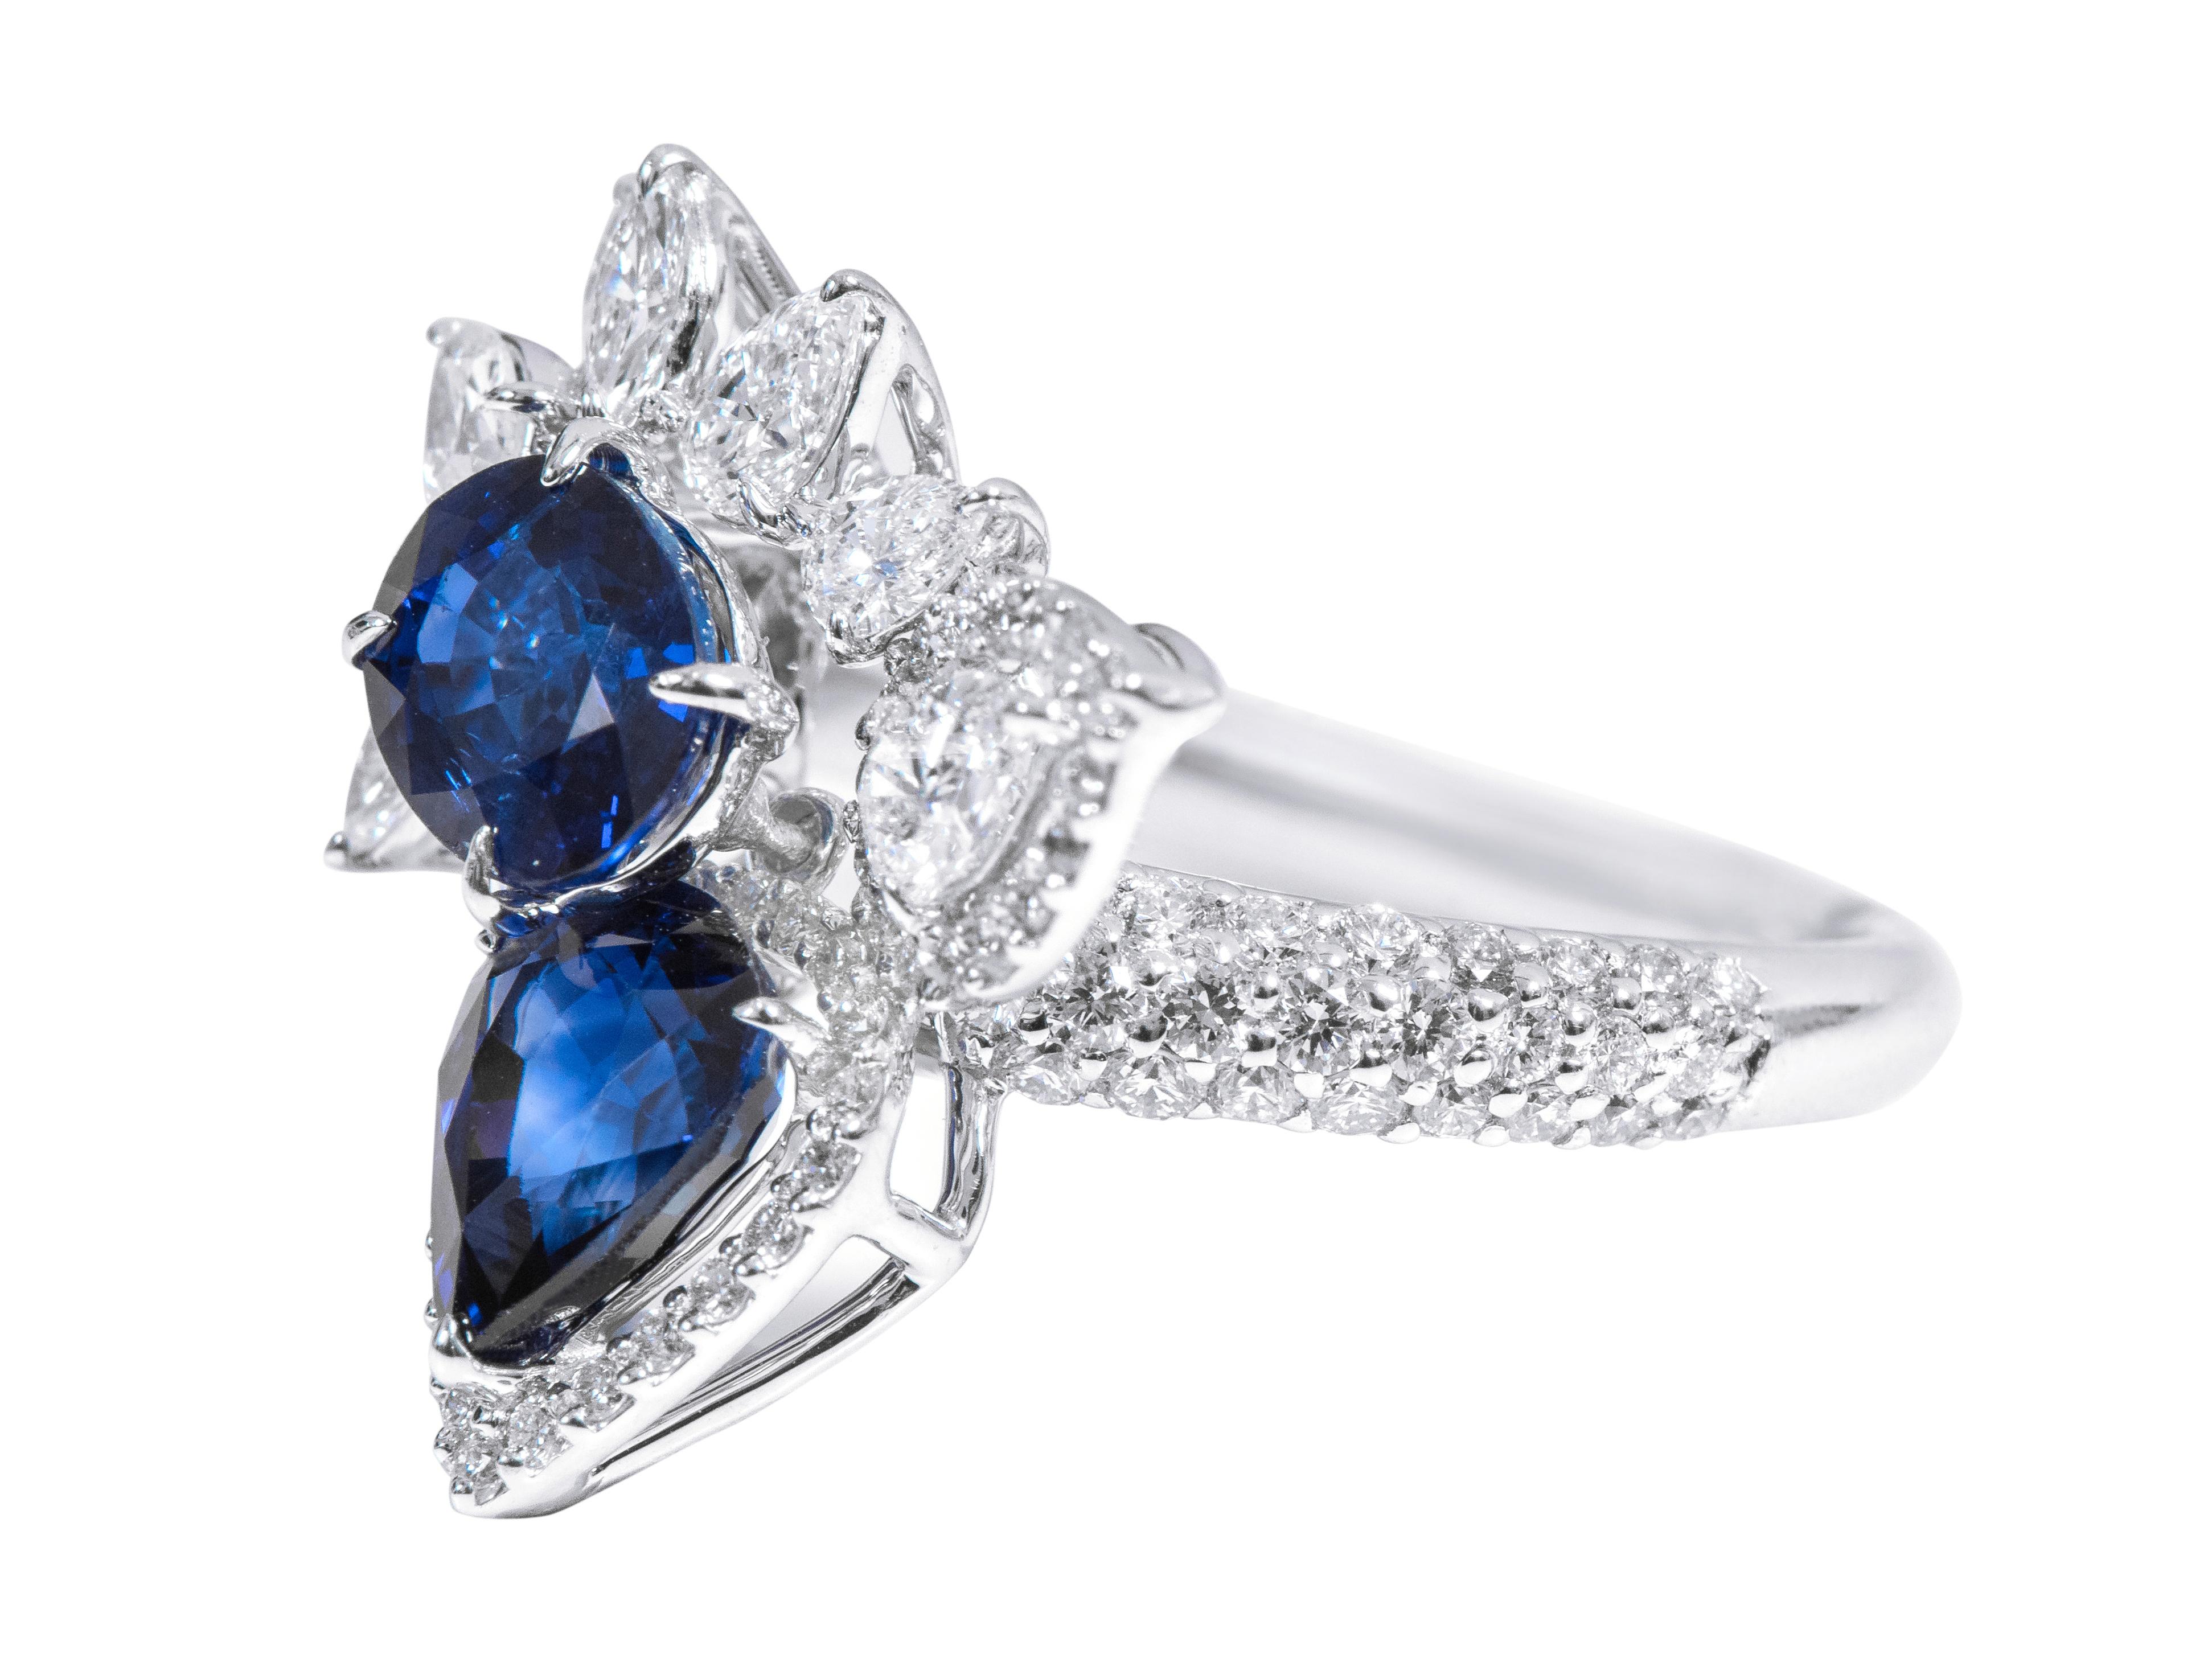 18 Karat White Gold 3.54 Carat Sapphire and Diamond Cocktail Ring

This marvelous royal blue sapphire and diamond cocktail ring is beyond exemplary. The inverted pear shape solitaire sapphire with a leveled down gaped open pave set diamond cluster